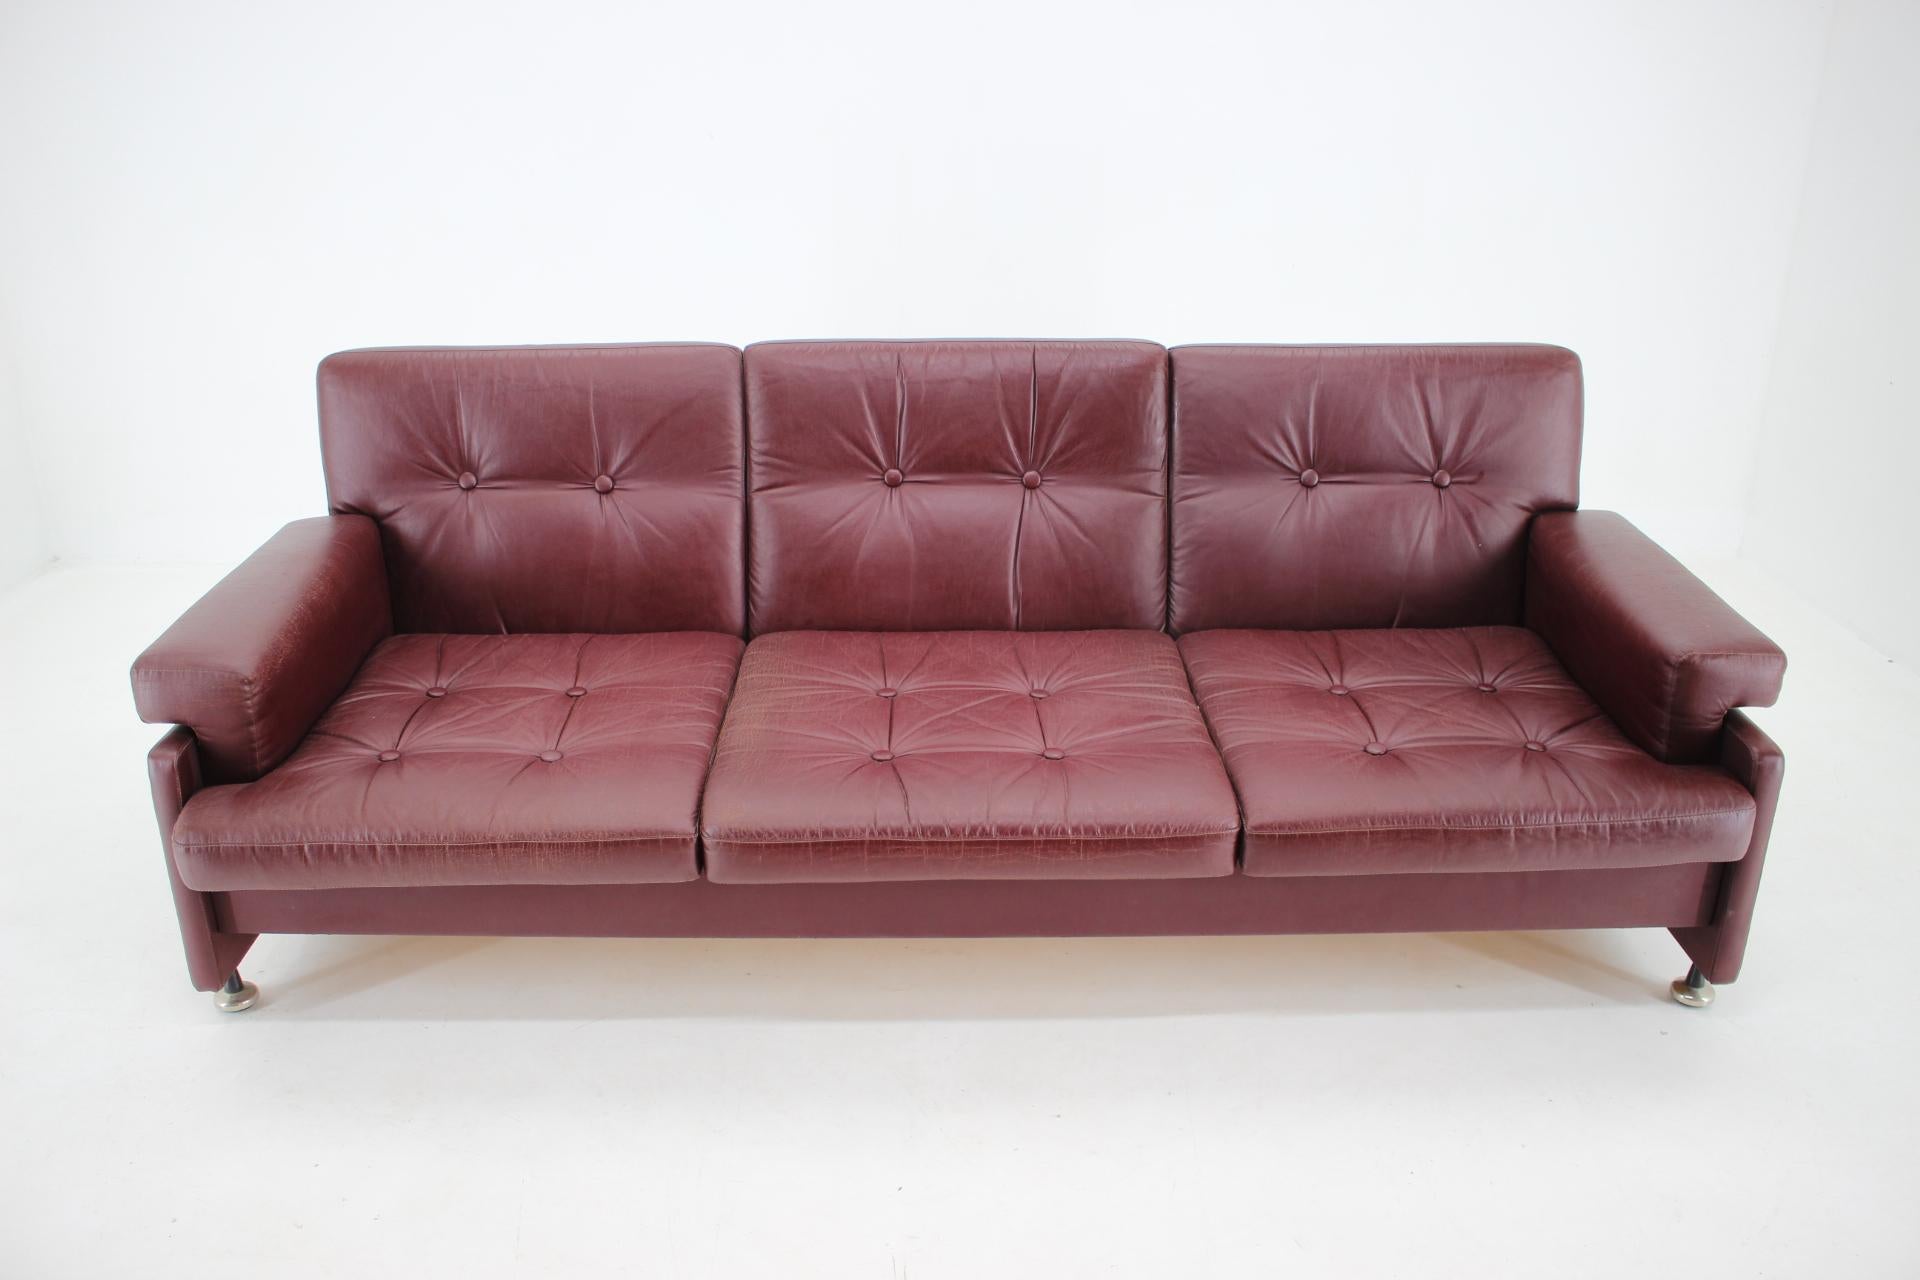 - 1970s, Czechoslovakia
- publicated in books and magazines
- designer: Arch. Spicka 
- very good original condition with patina
- combination of leather and leatherette
- dimensions of 